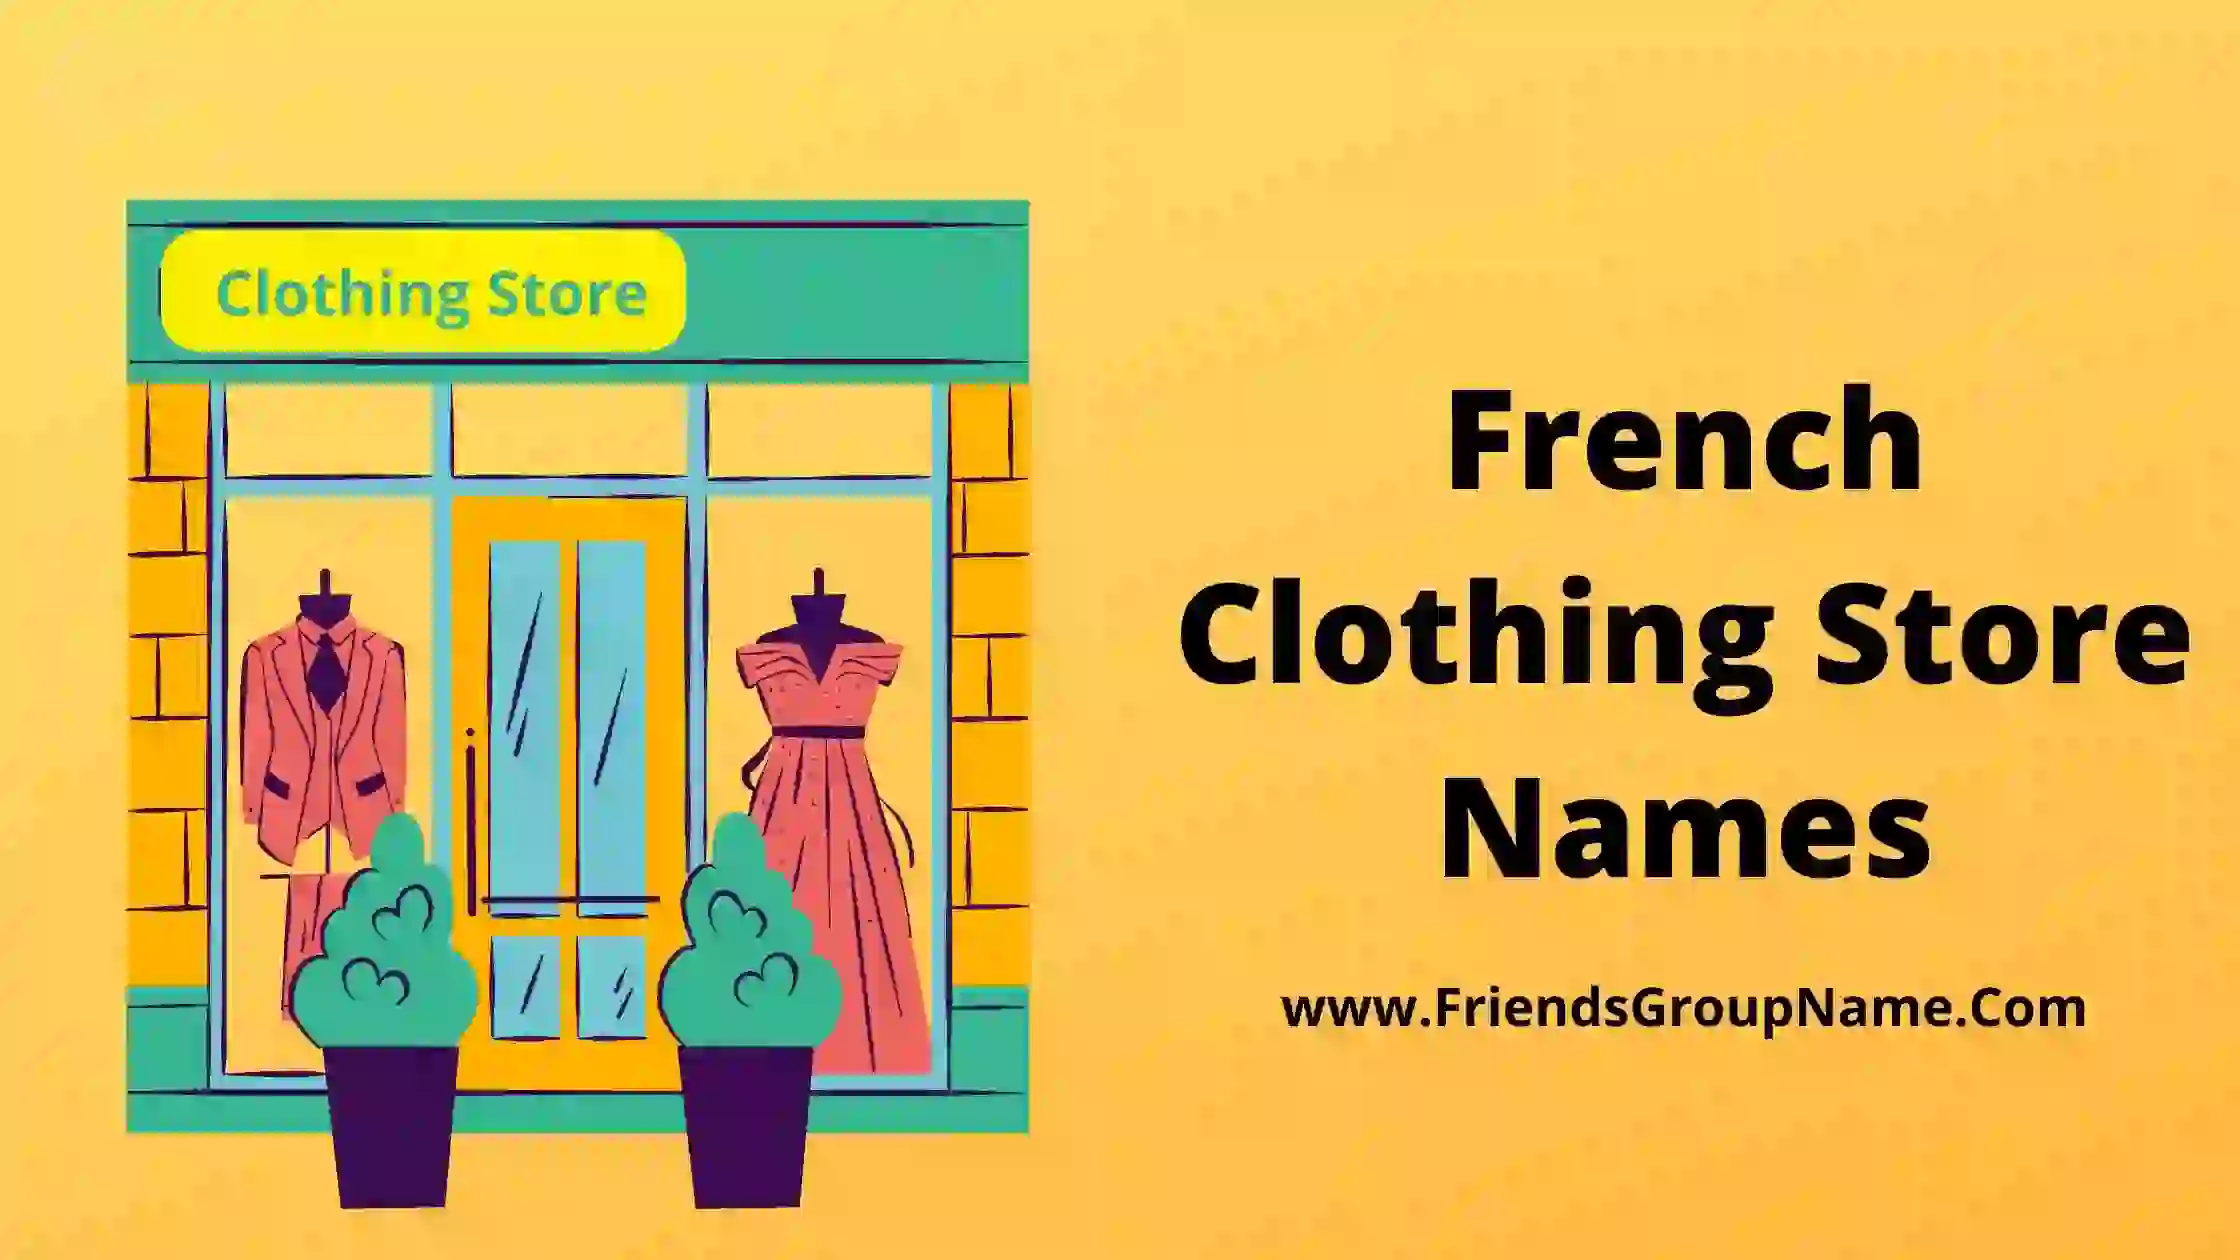 French Clothing Store Names